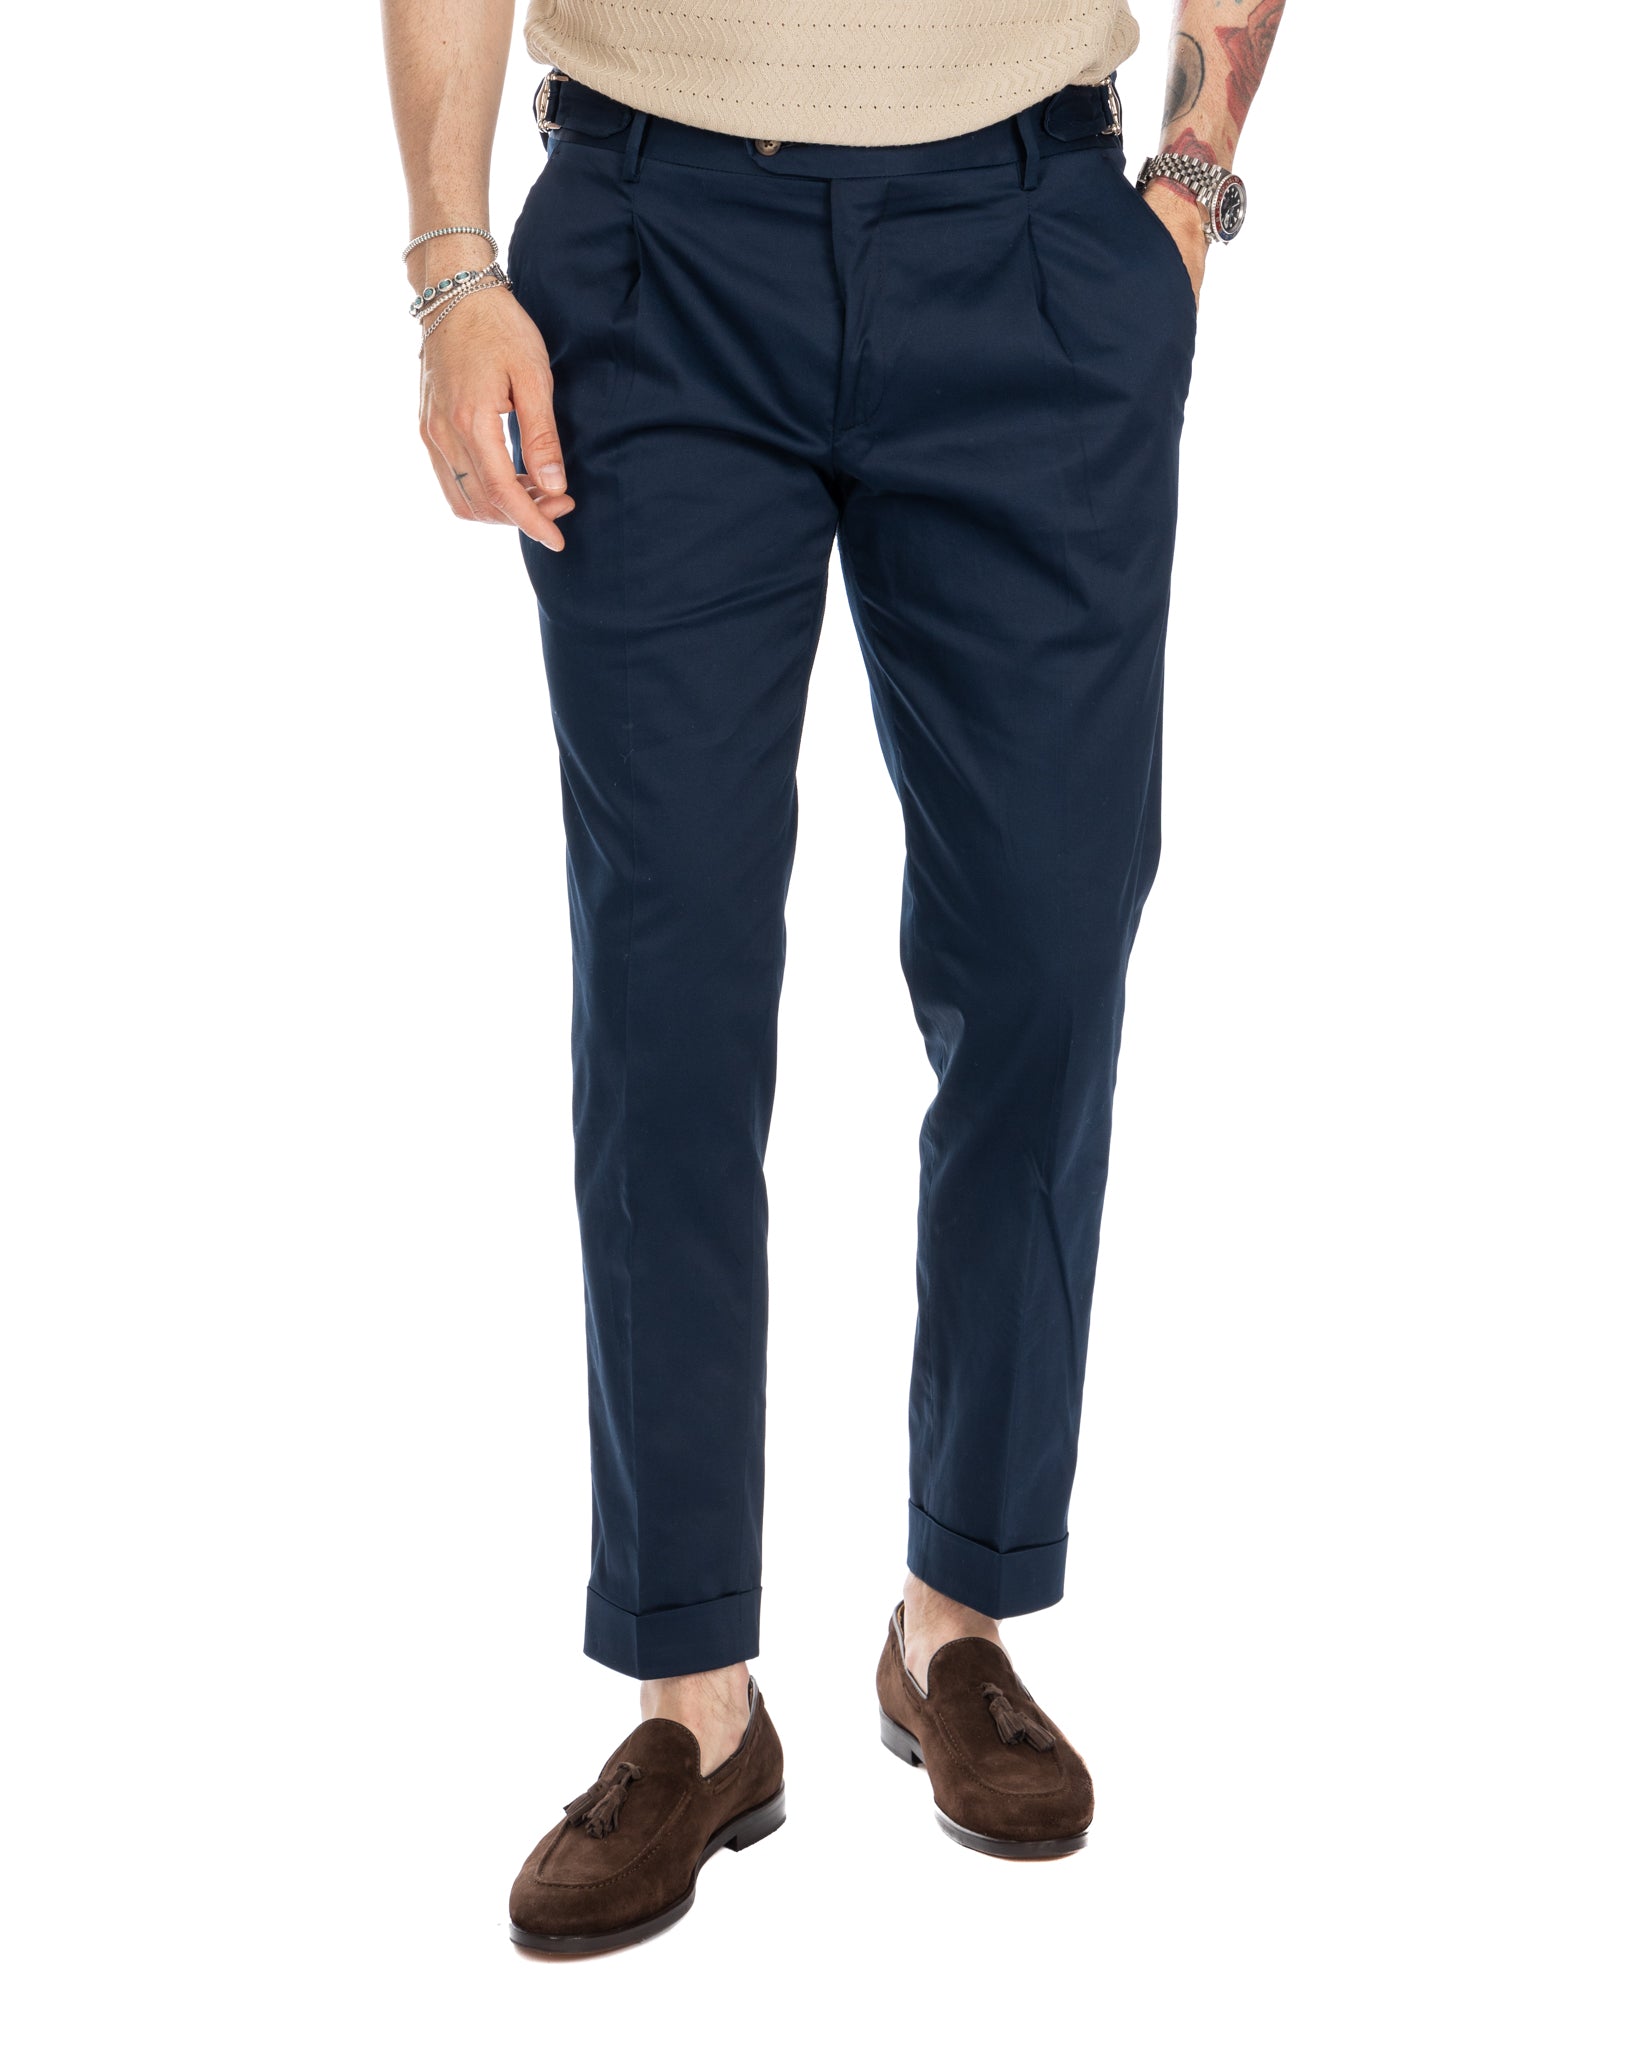 James - blue high-waisted trousers with buckles